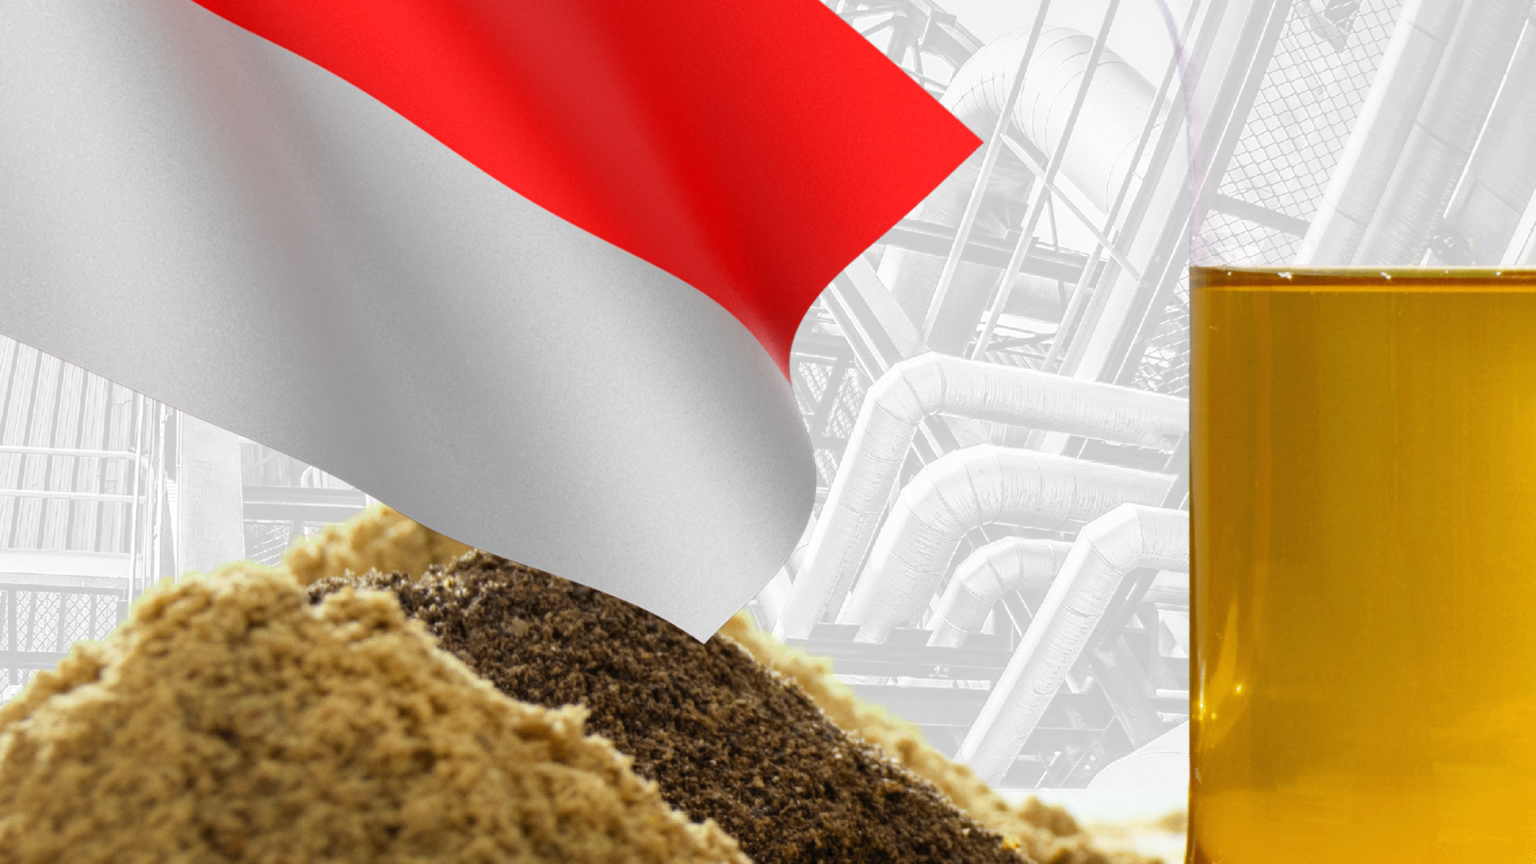 Indonesia qualifies the first six establishments in the animal rendering sector in Brazil